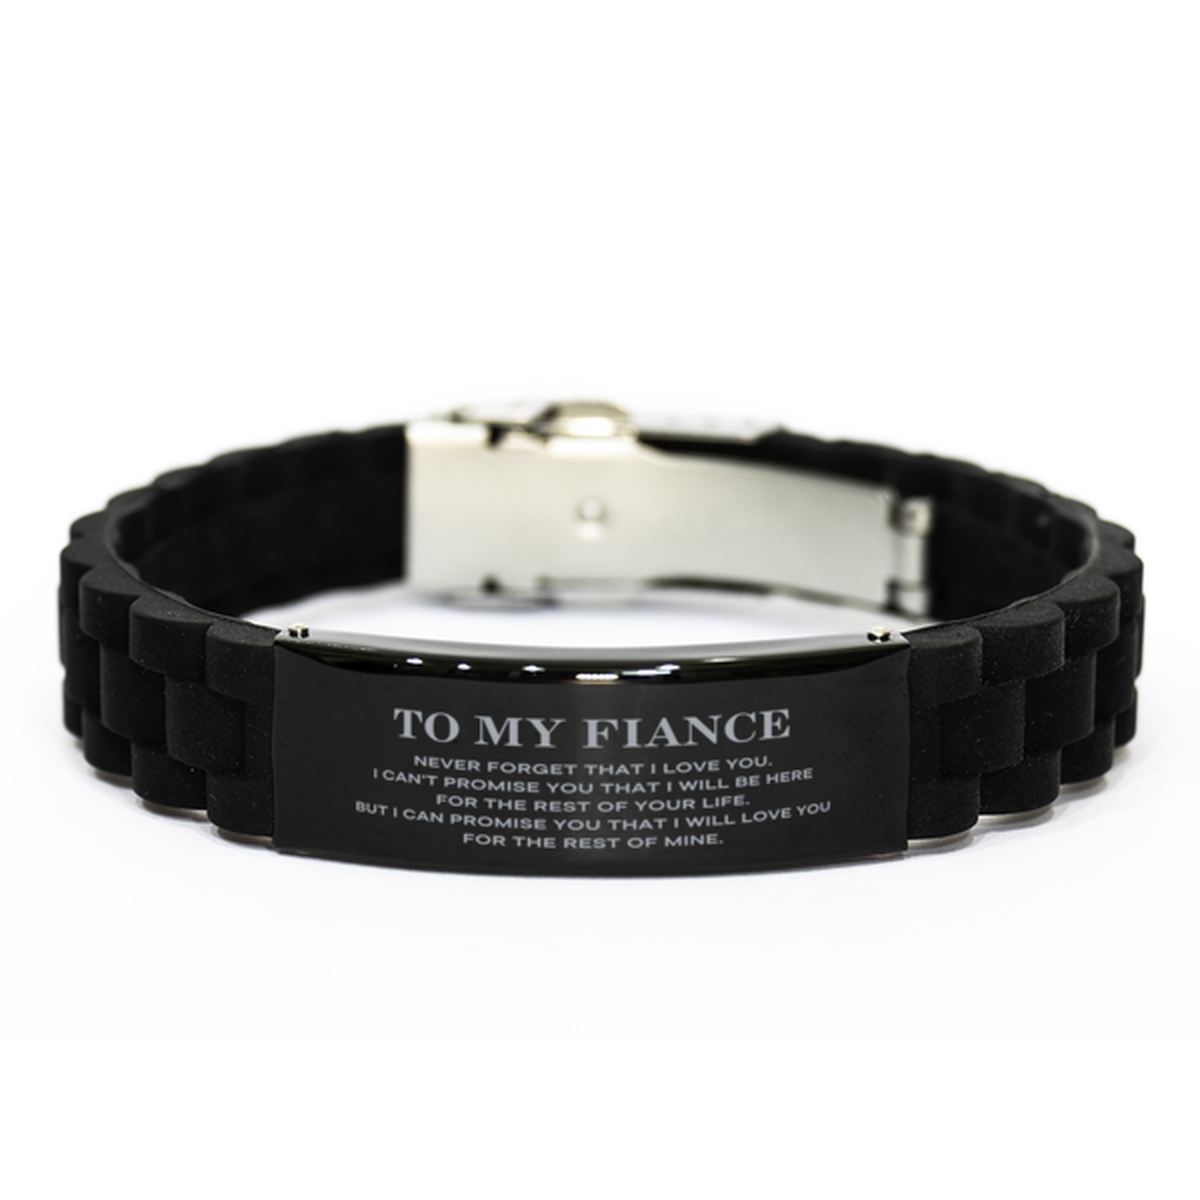 To My Fiance Gifts, I will love you for the rest of mine, Love Fiance Bracelet, Birthday Christmas Unique Black Glidelock Clasp Bracelet For Fiance